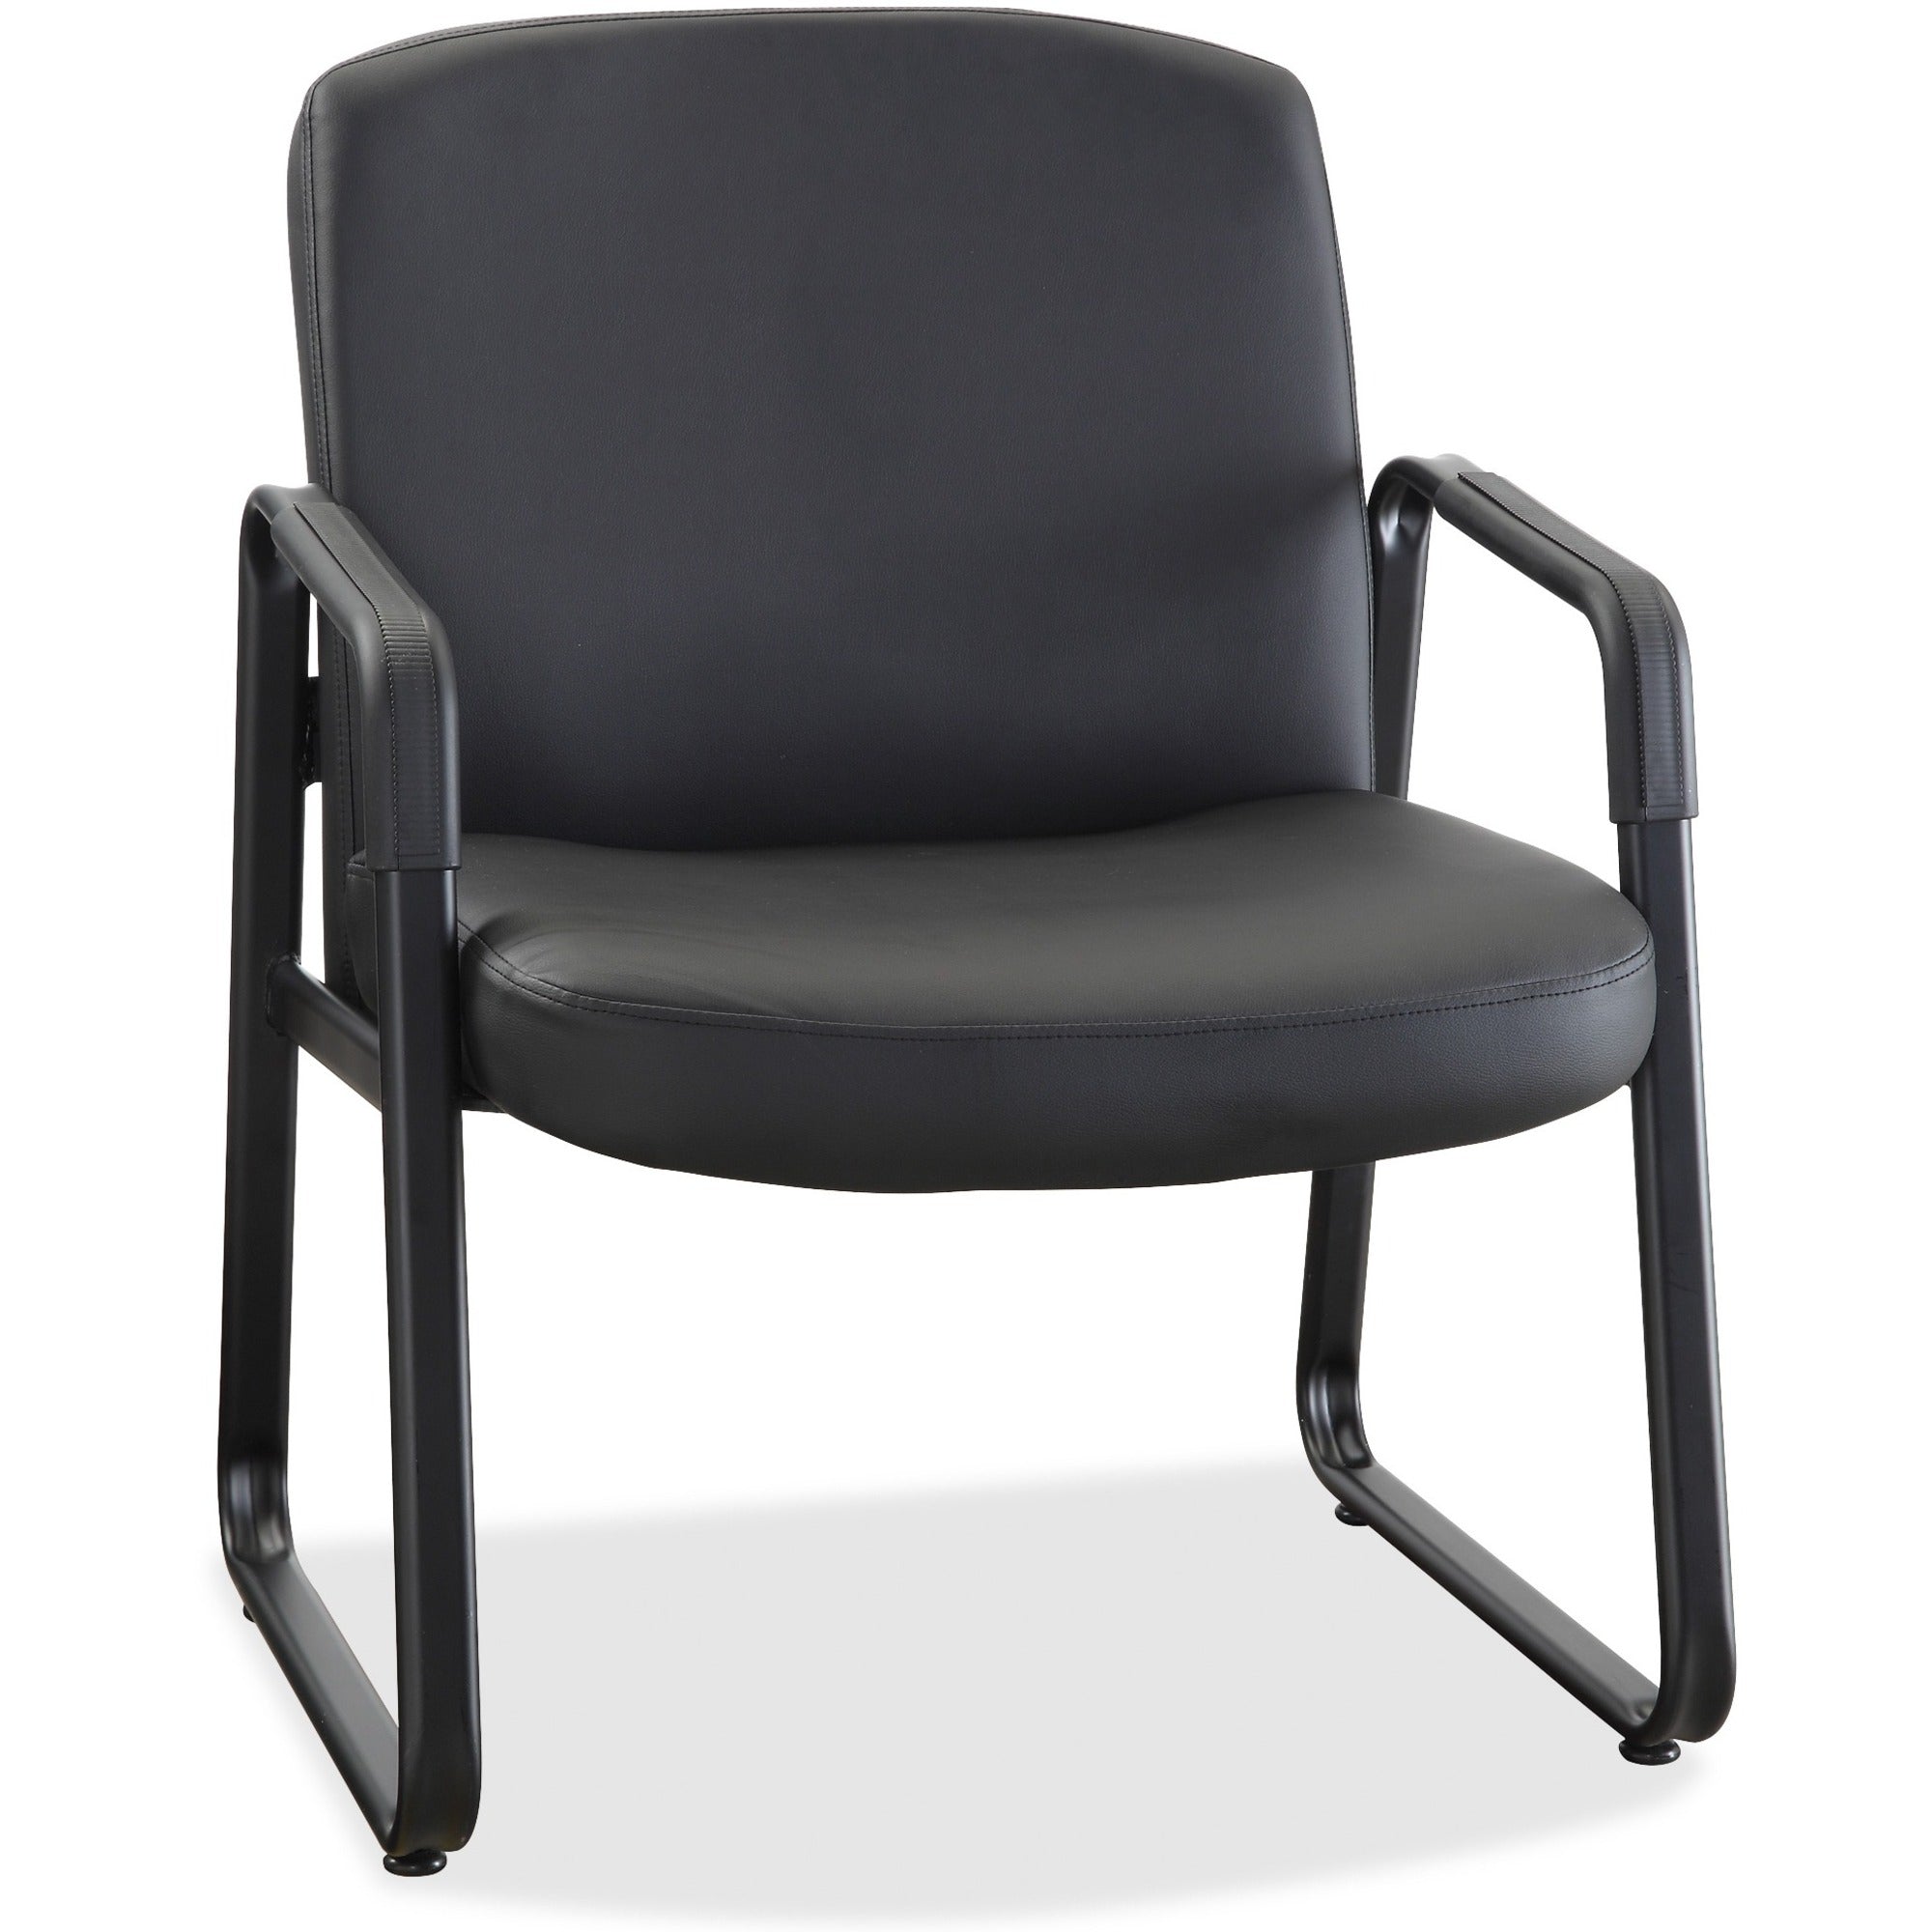 lorell-big-&-tall-upholstered-guest-chair-leather-plywood-seat-leather-plywood-back-powder-coated-metal-frame-sled-base-black-1-each_llr84587 - 1